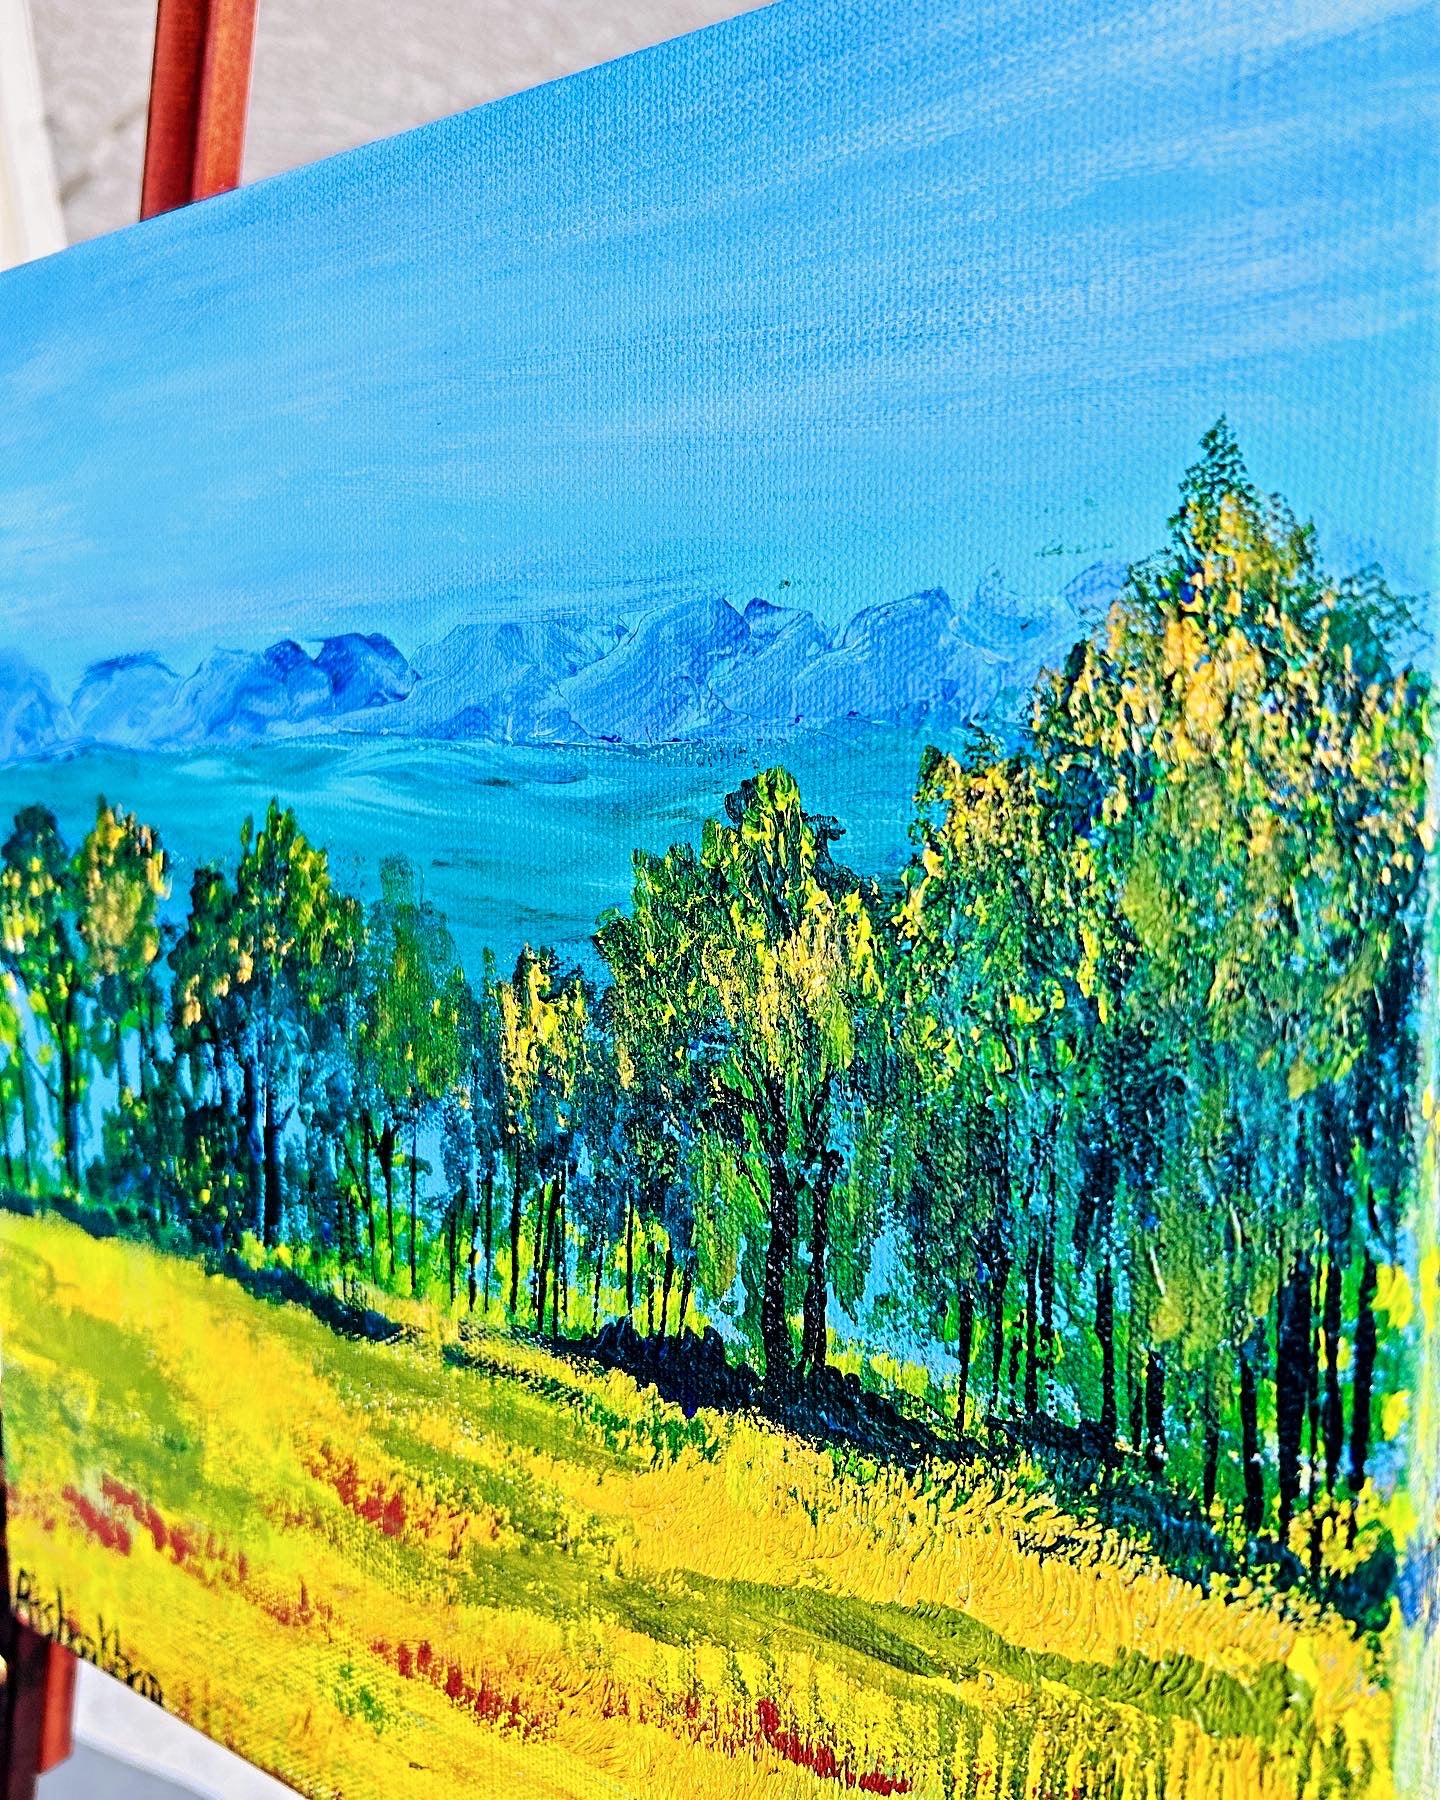 Immensity in view, original painting